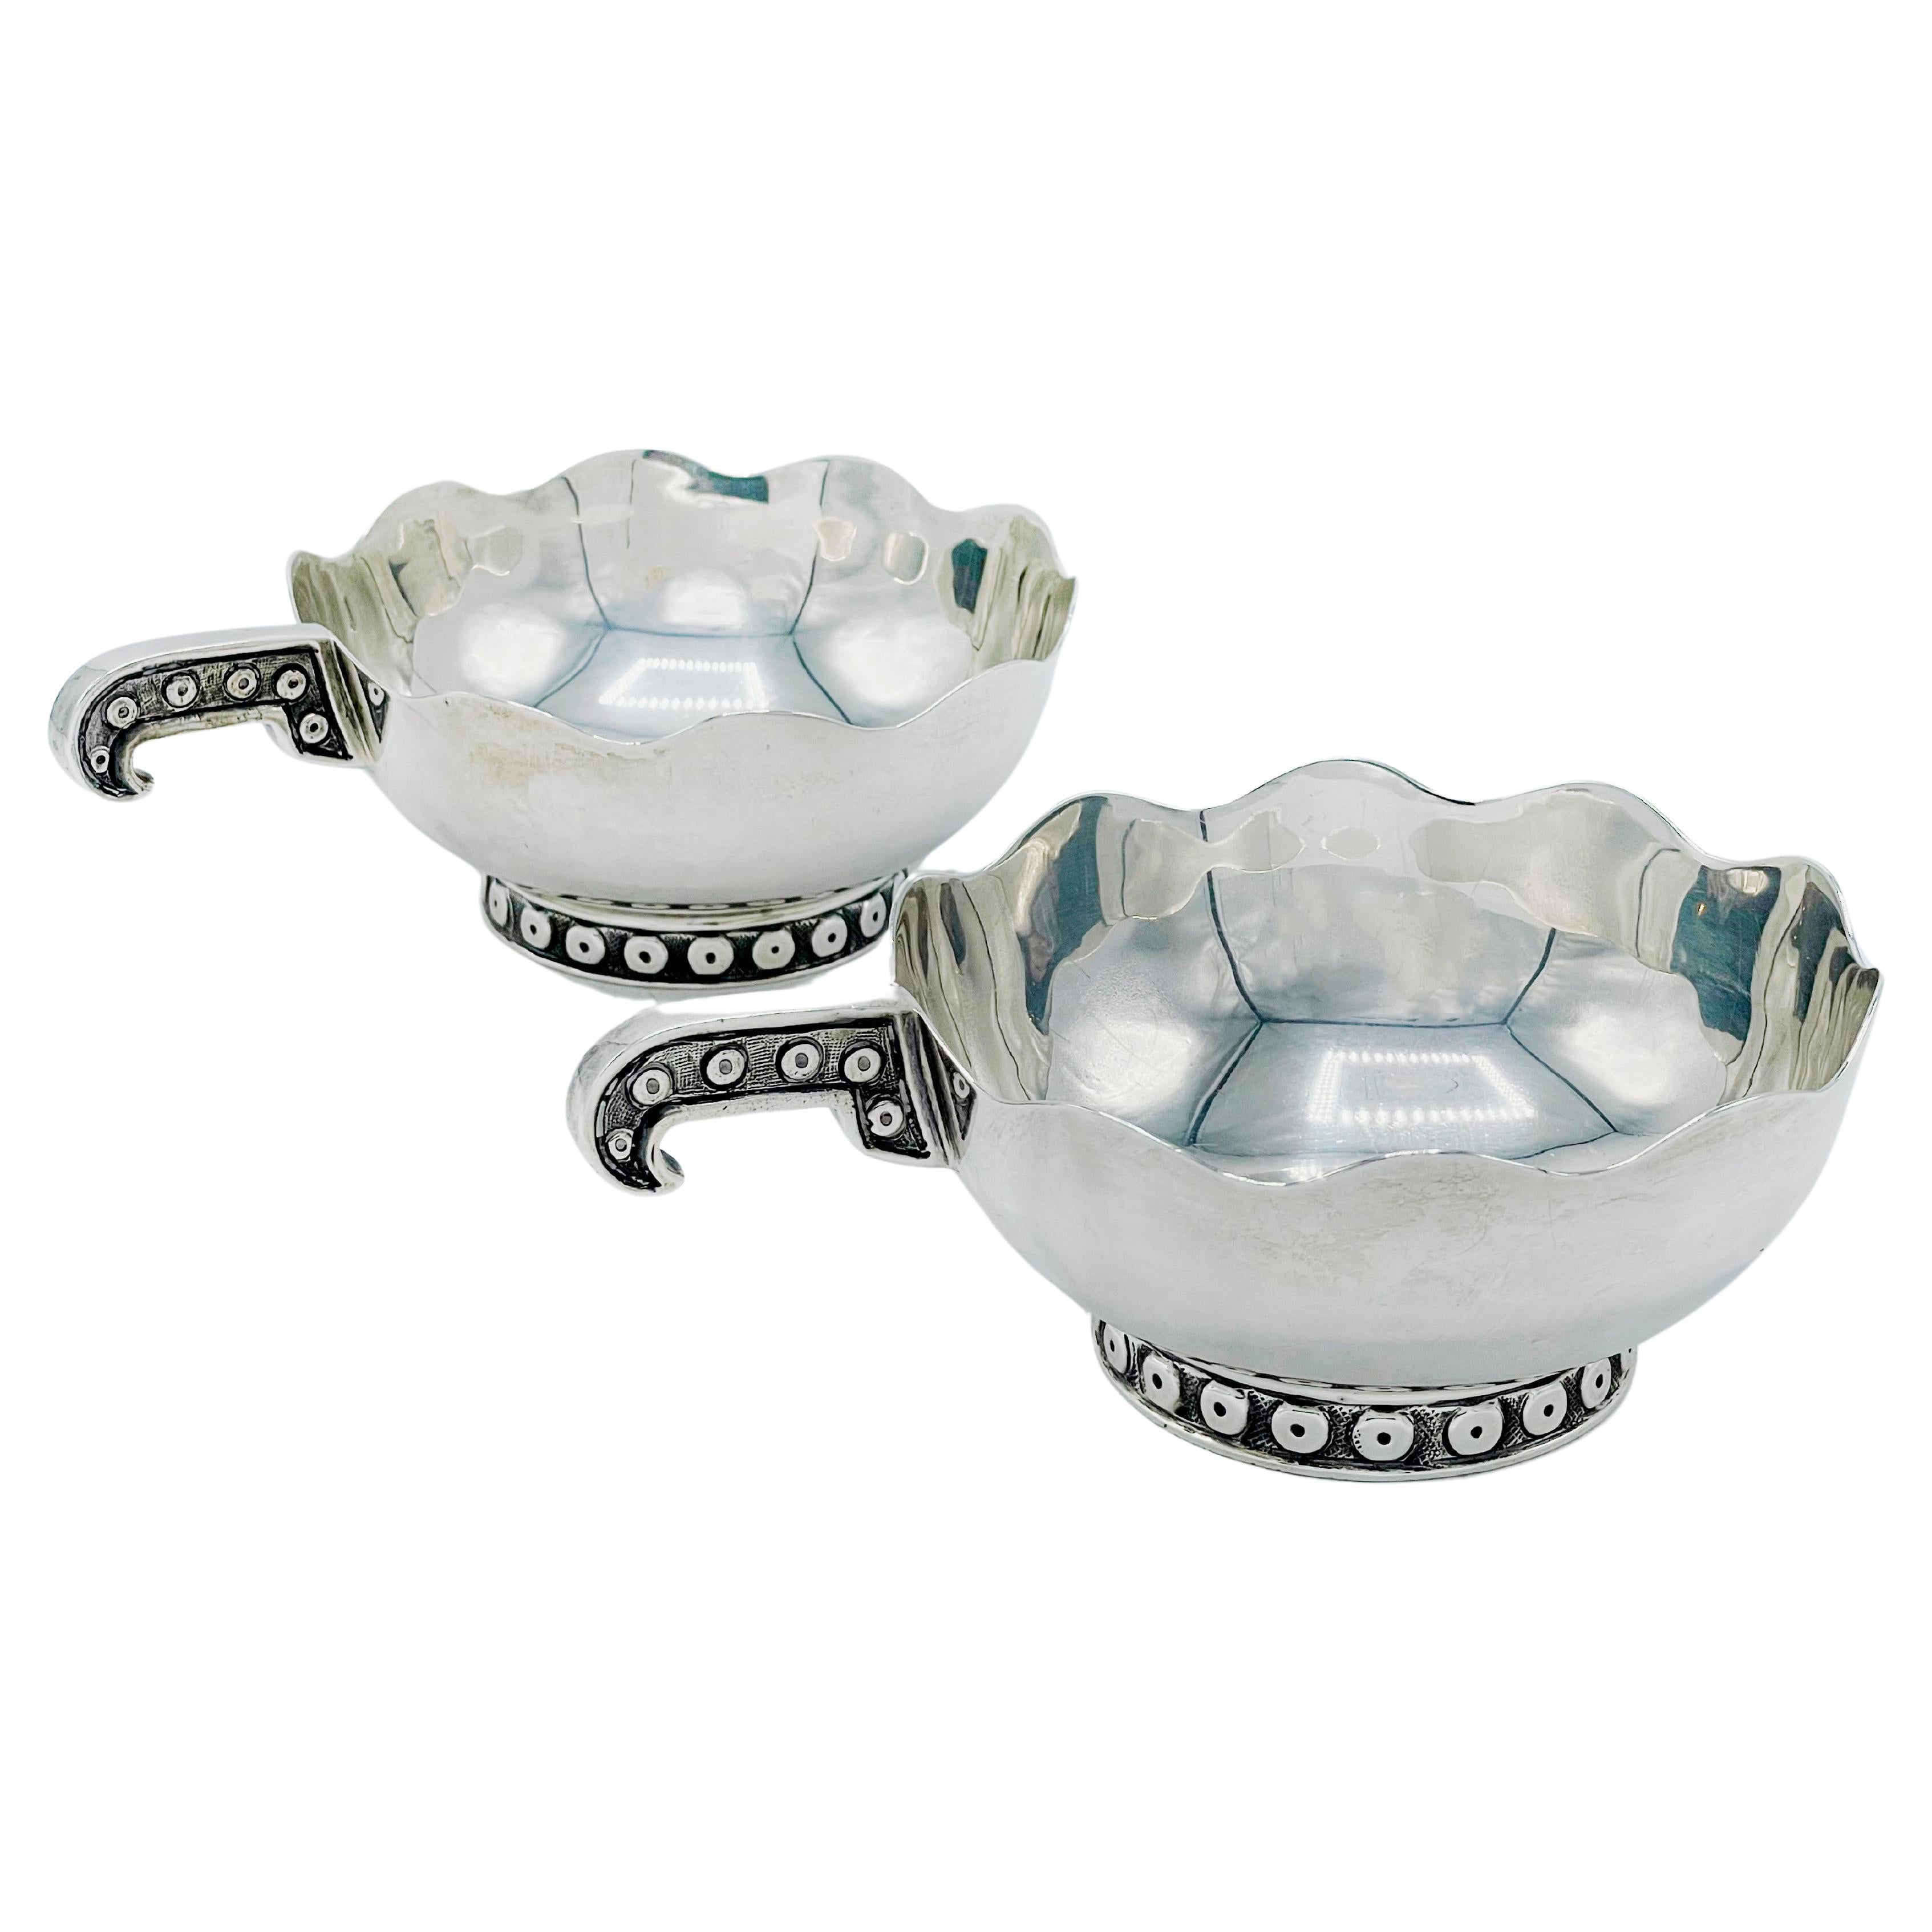 Pair of modern sauce boats with sterling silver legs and handle designed and made by Tane Orfebres in Mexico. The two open sauce boats are decorated with elements of the mythical Quetzalcoatl design on the handle and around the base.
Stamped on